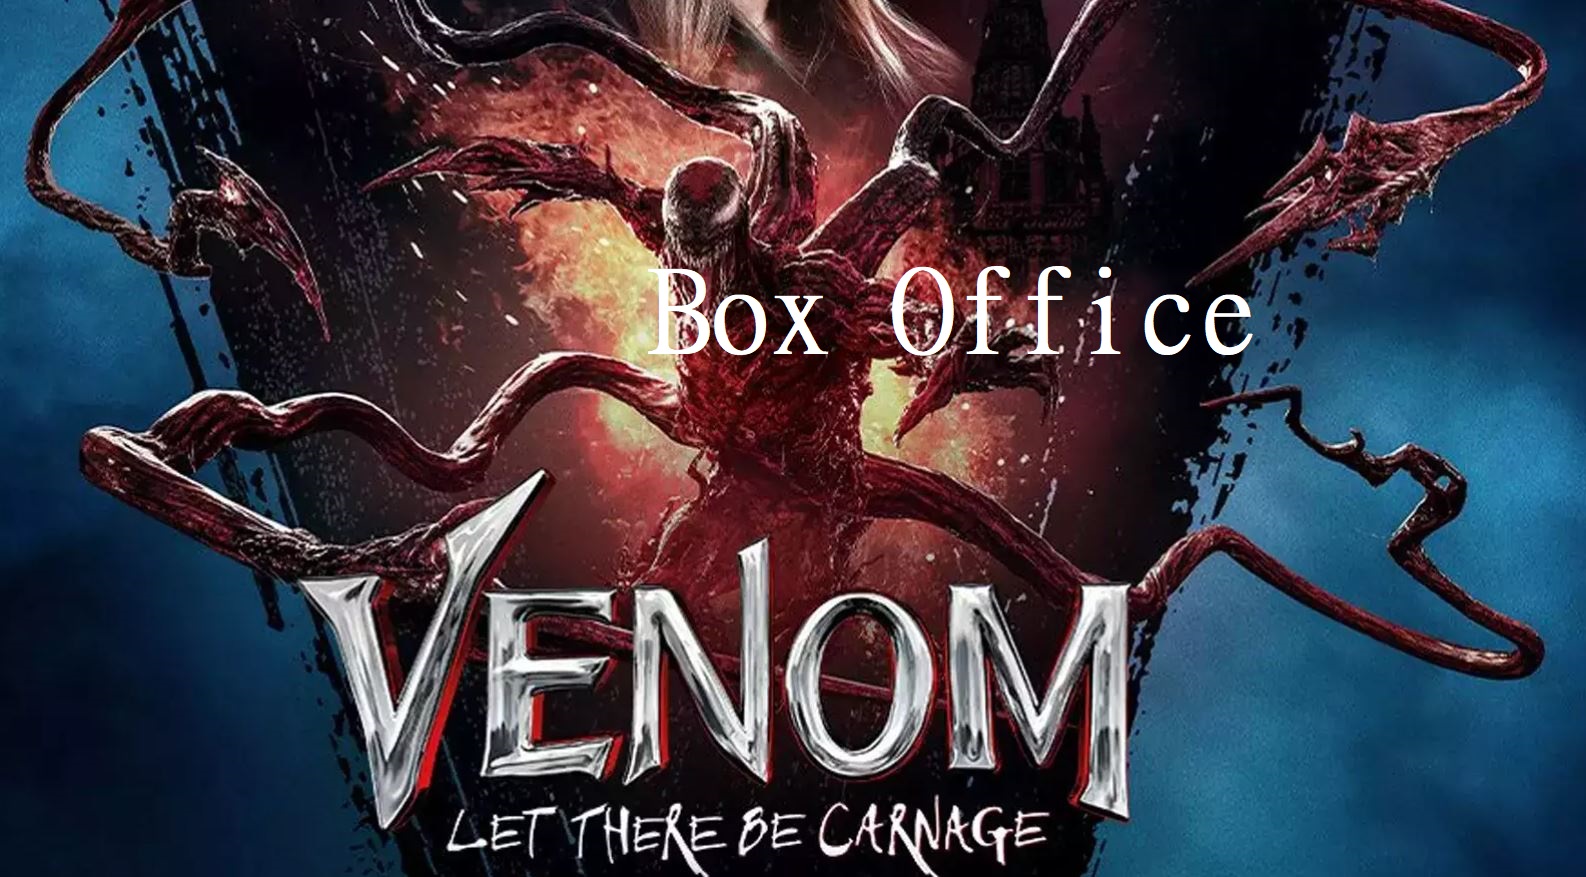 Venom Let There Be Carnage wins over the Box Office